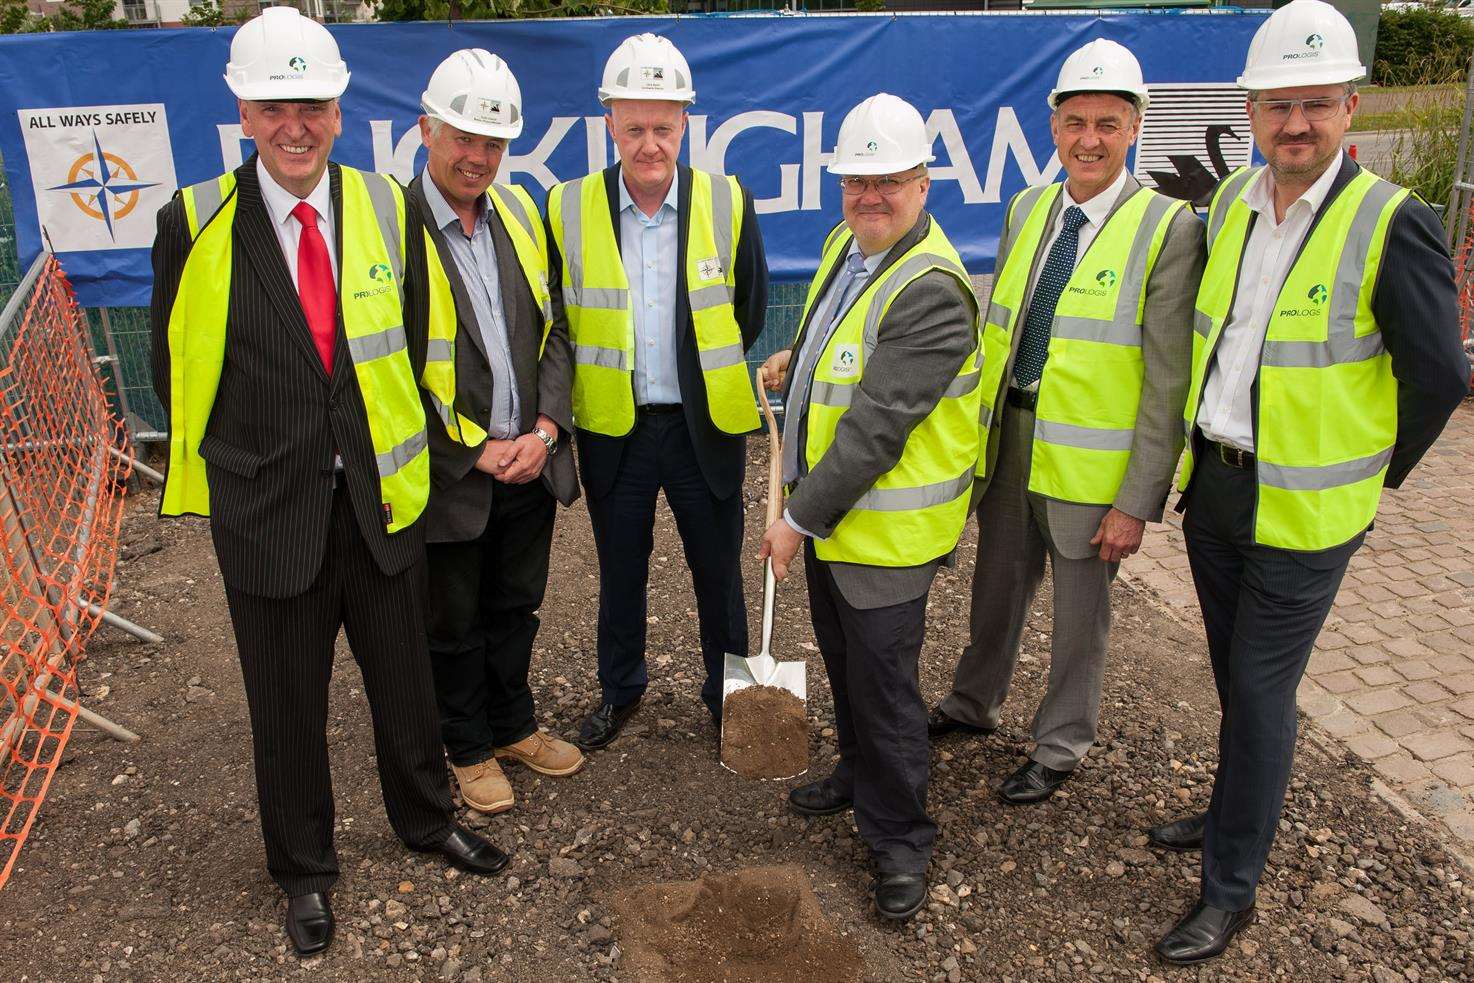 Work begins on SEM's new headquarters in Dartford: from left, SEM chief executive Michael Laming, Buckingham Group project manager Colin Overall, Buckingham Group director Clive Bailie, Dartford Borough Council leader Jeremy Kite, Dartford Borough Council managing director Graham Harris and Prologis director Jamie West